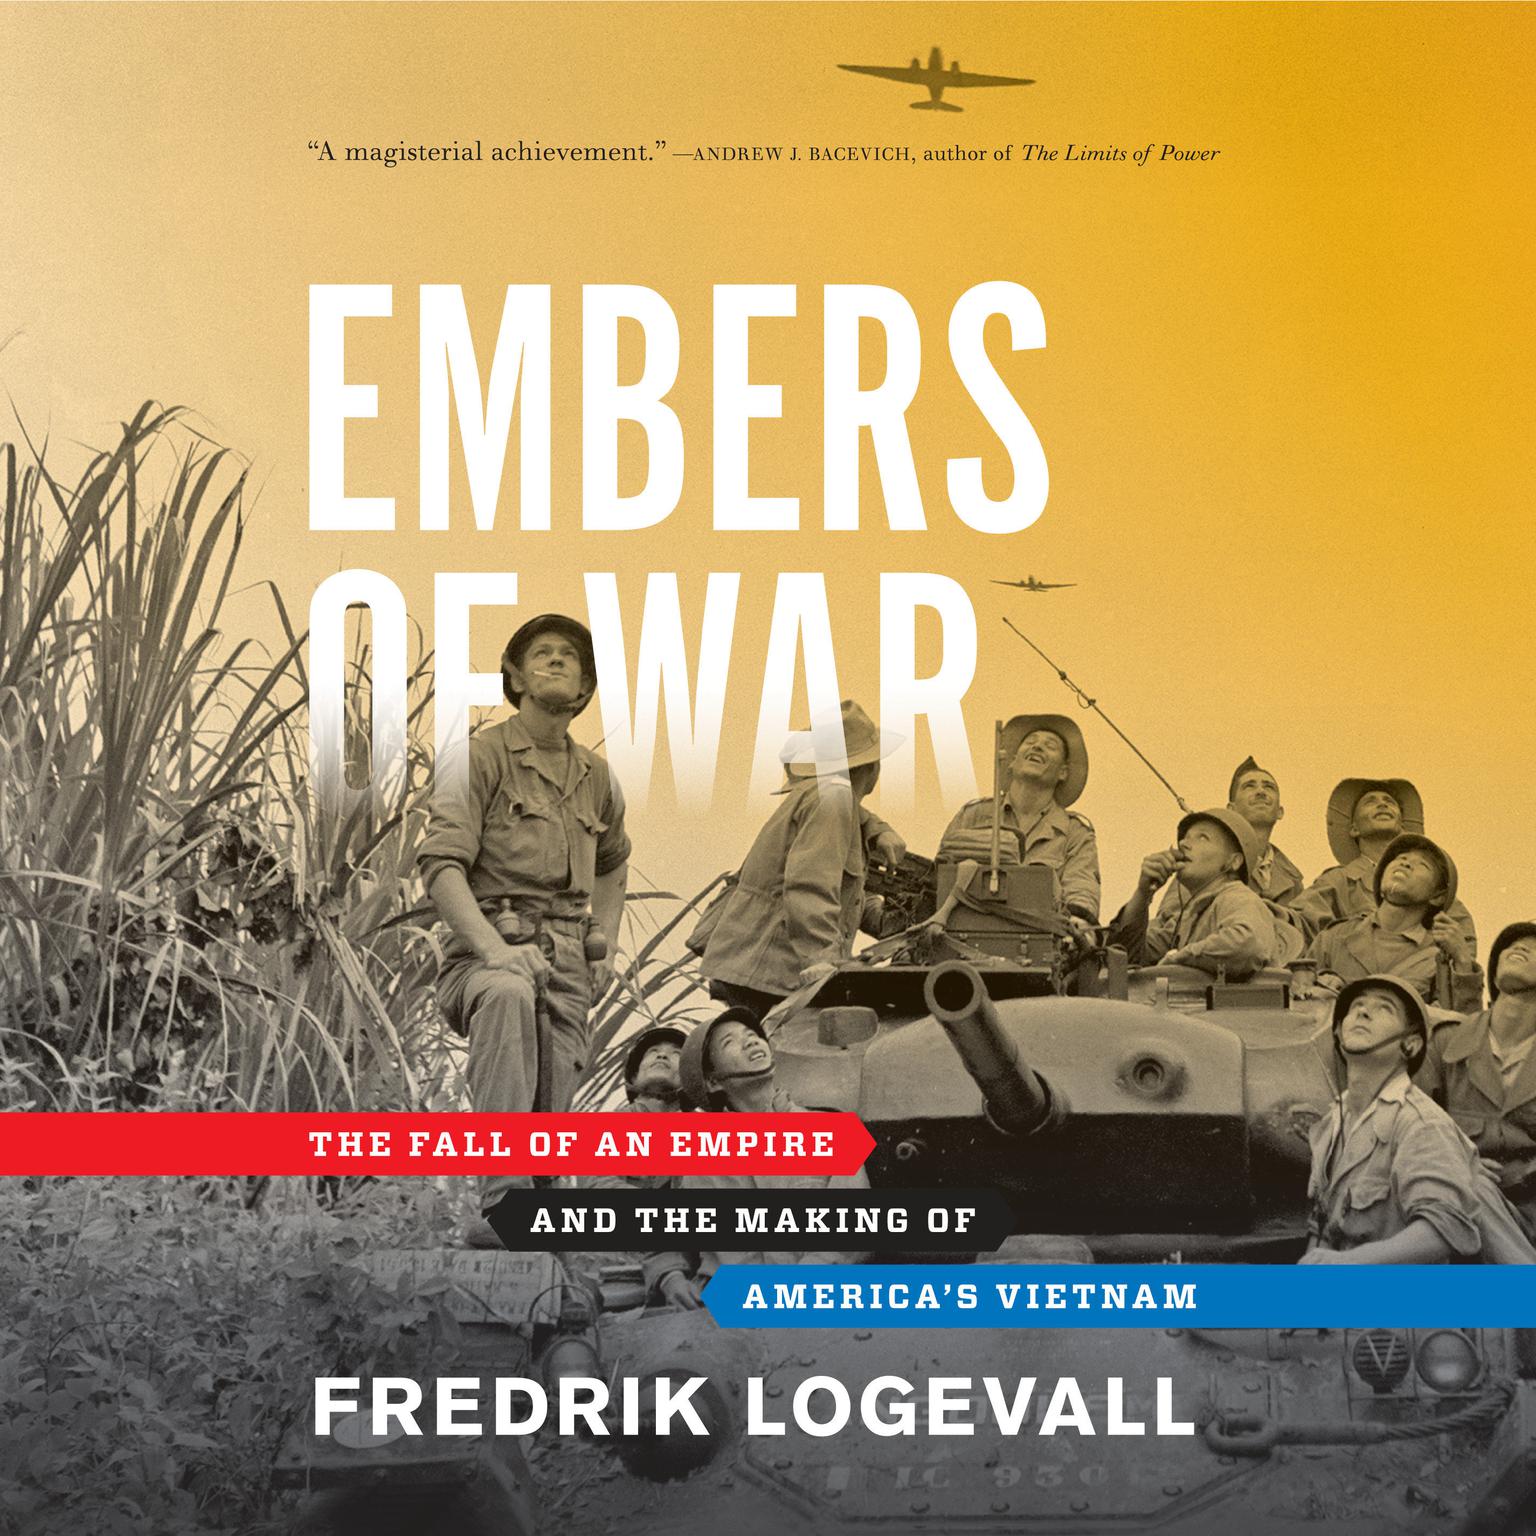 Embers of War: The Fall of an Empire and the Making of Americas Vietnam Audiobook, by Fredrik Logevall